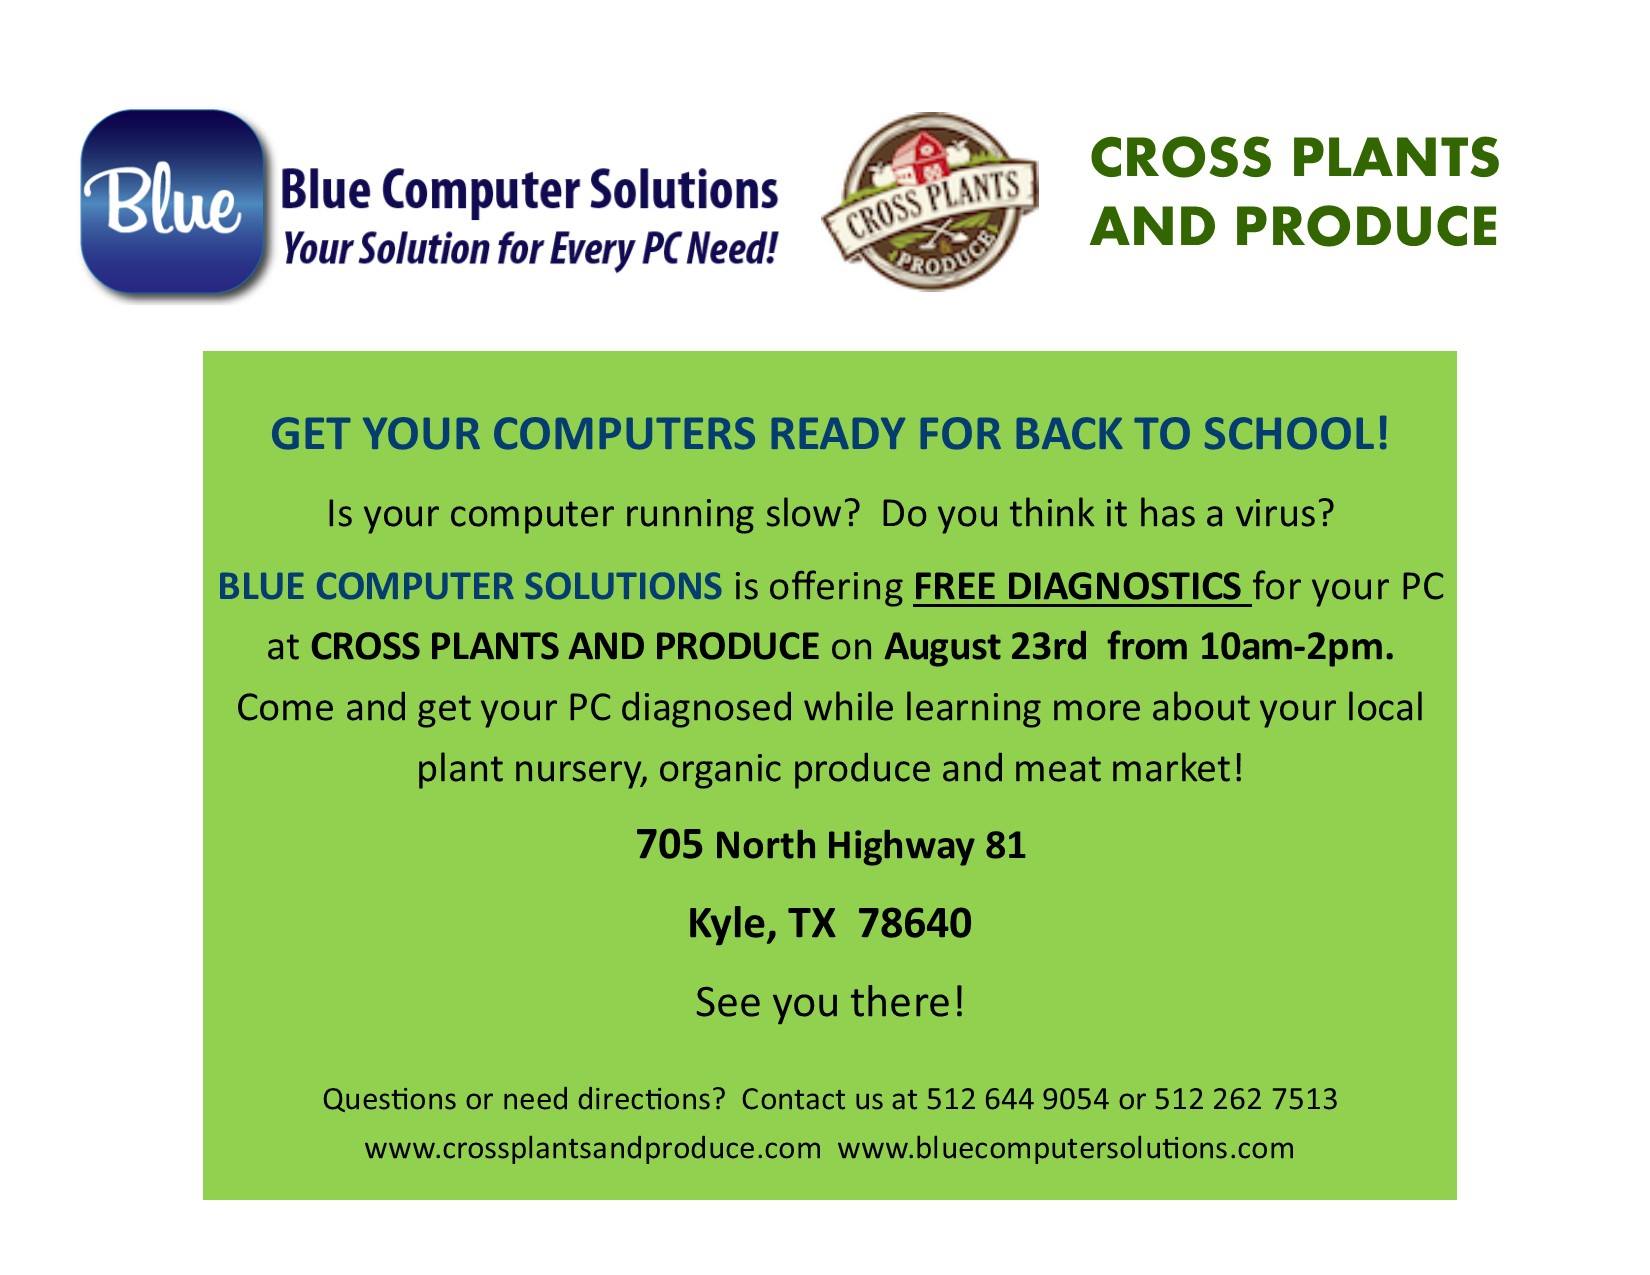 Blue Computer Solutions Free PC Diagnostics Event at Cross Plants and Produce